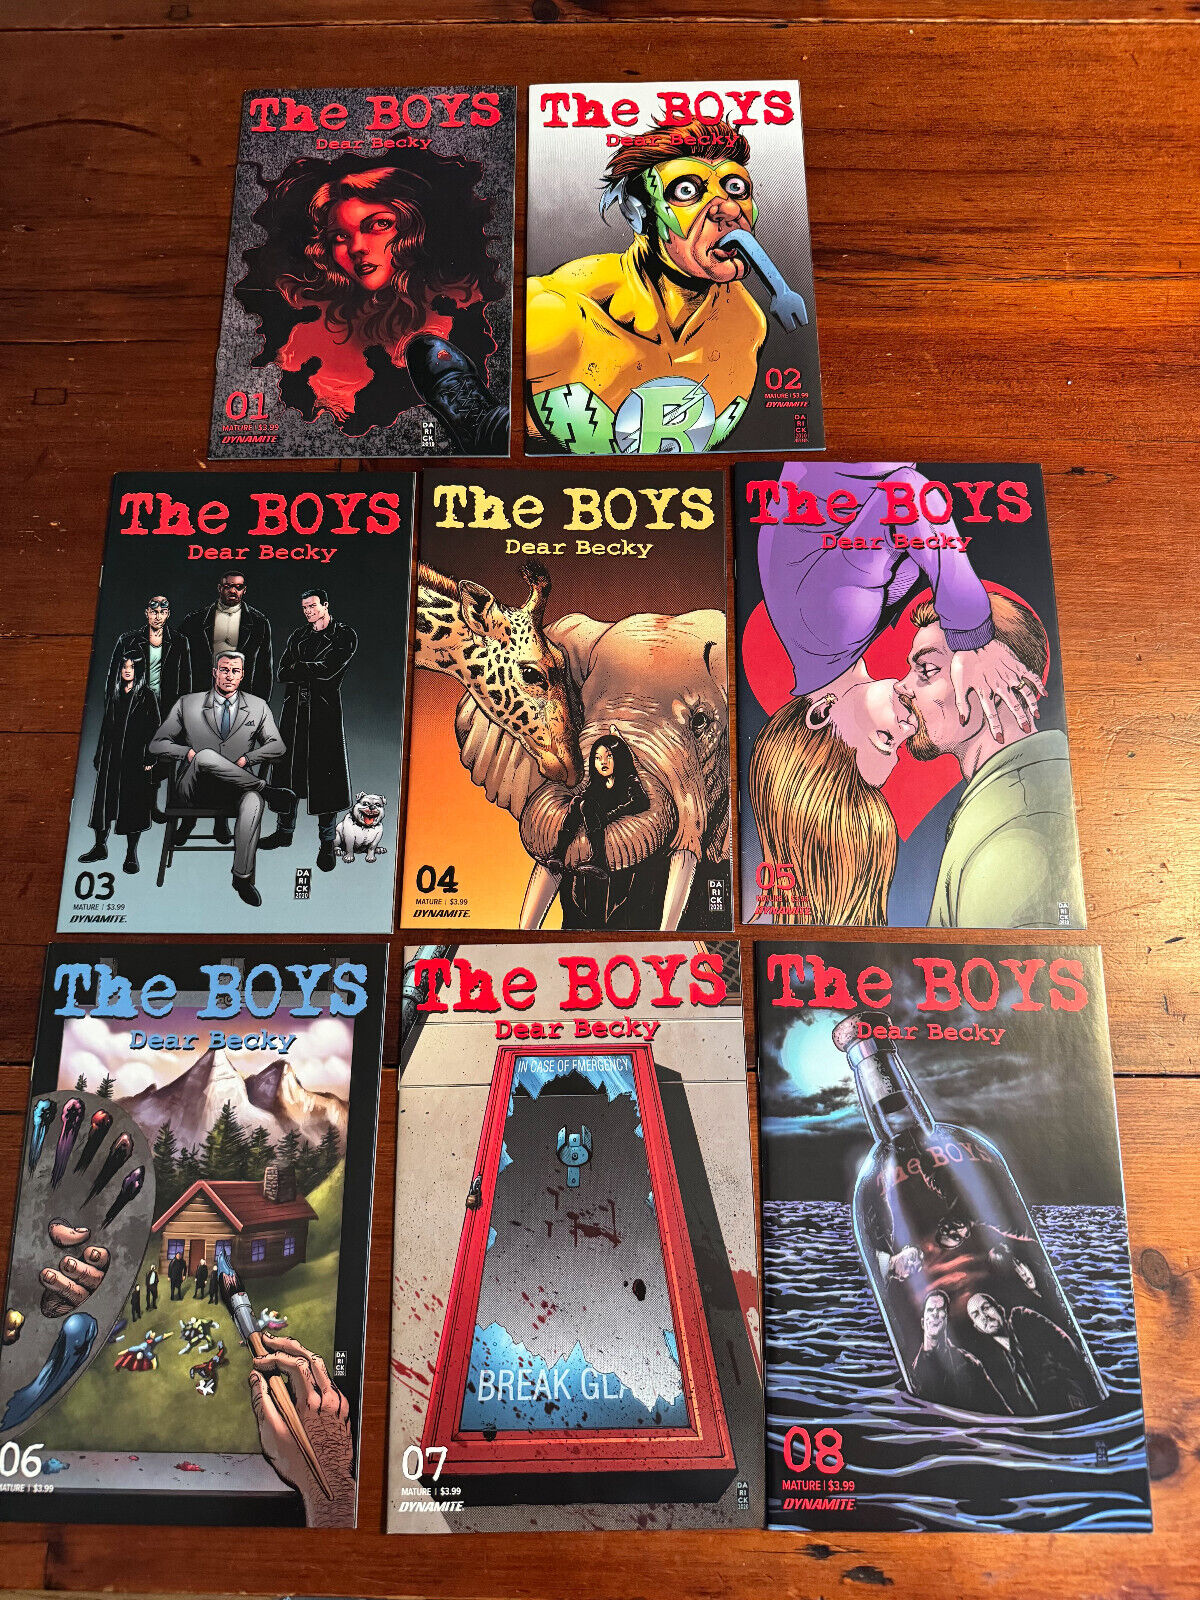 The Boys:Dear Becky (2020) #1-8 Complete Set-Garth Ennis-Very Nice-FAST SHIPPING